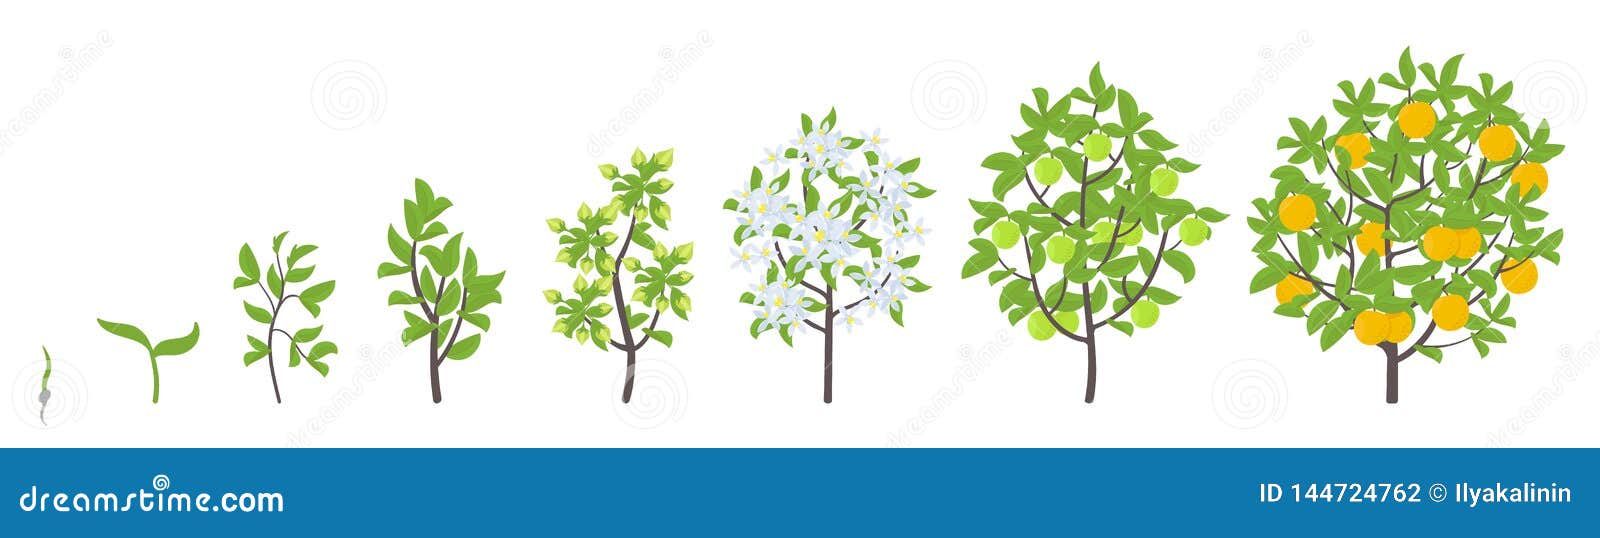 Sweet Oranges Tree  Growth Stages Vector Illustration 